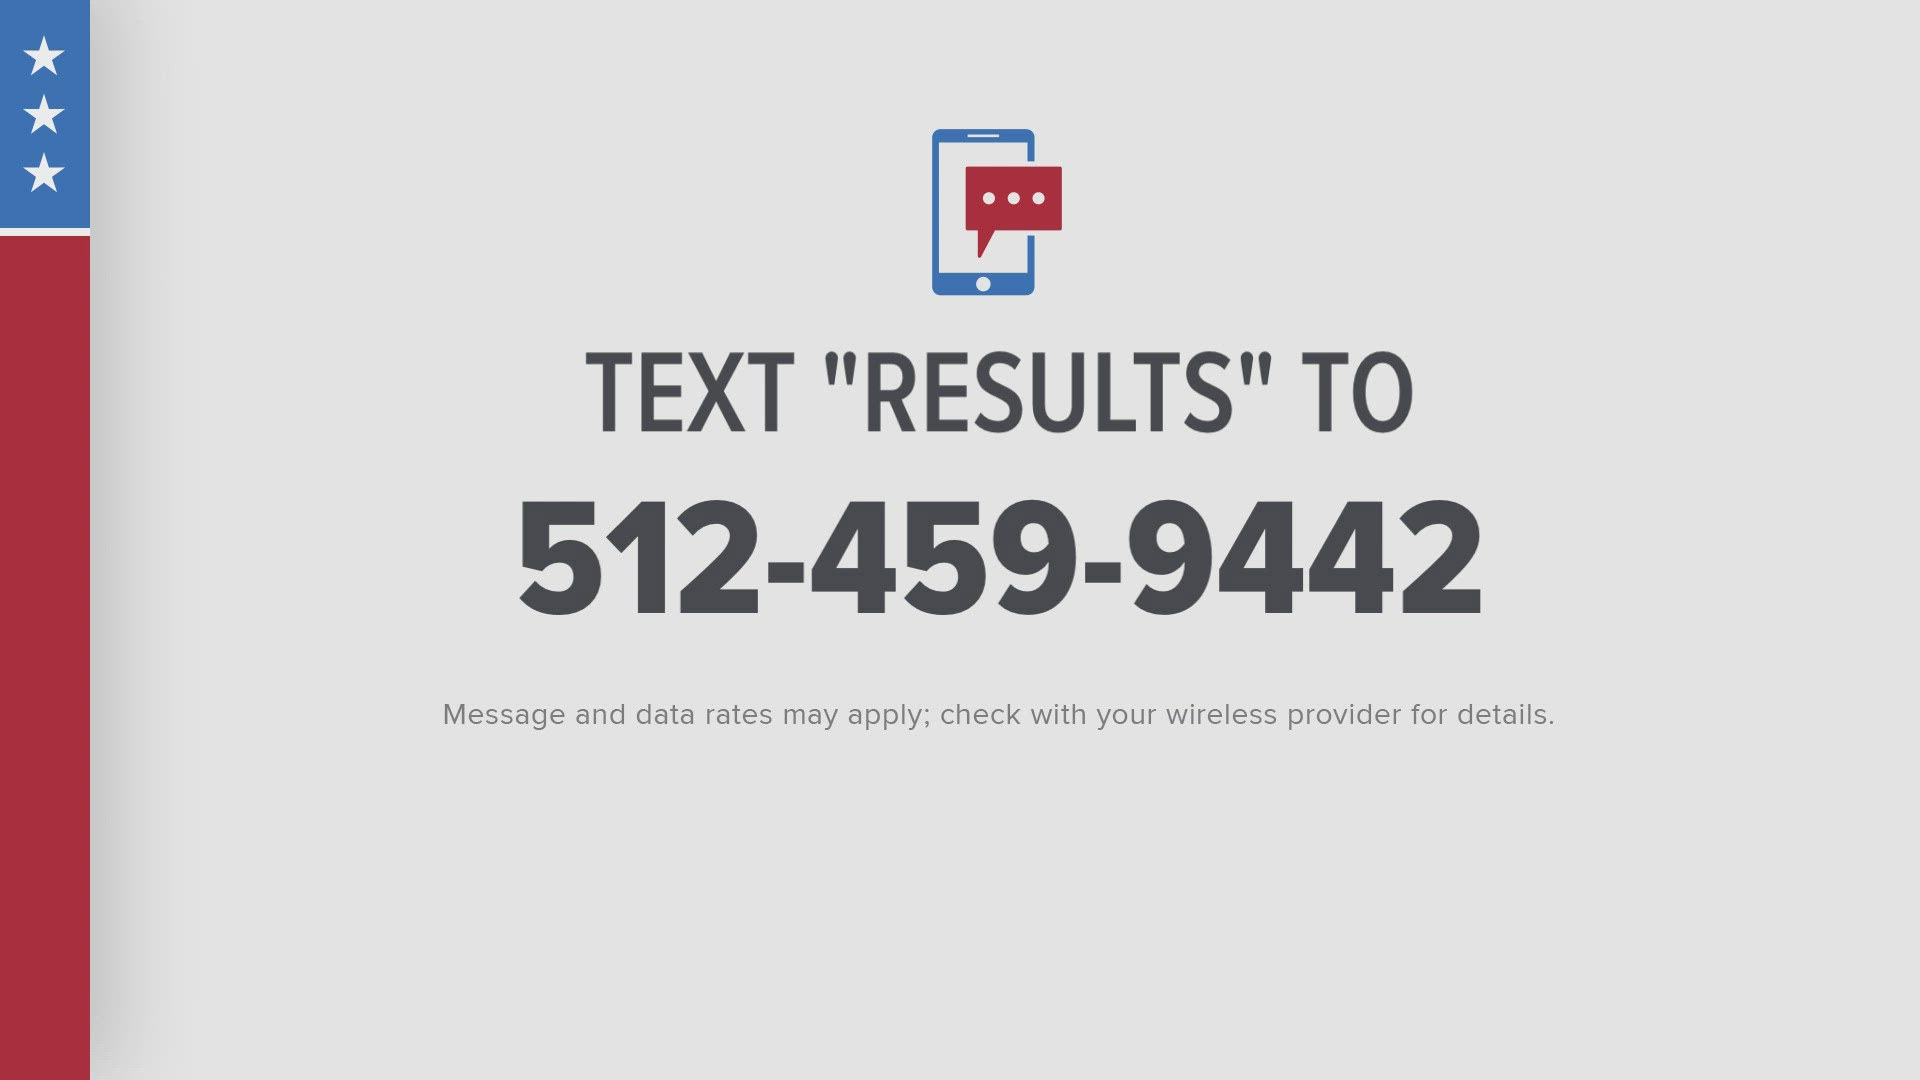 From school bond elections to a mayoral candidacy, a wide range of issues were listed on the May 4 ballot. Text "RESULTS" to 512-459-9442 for more.